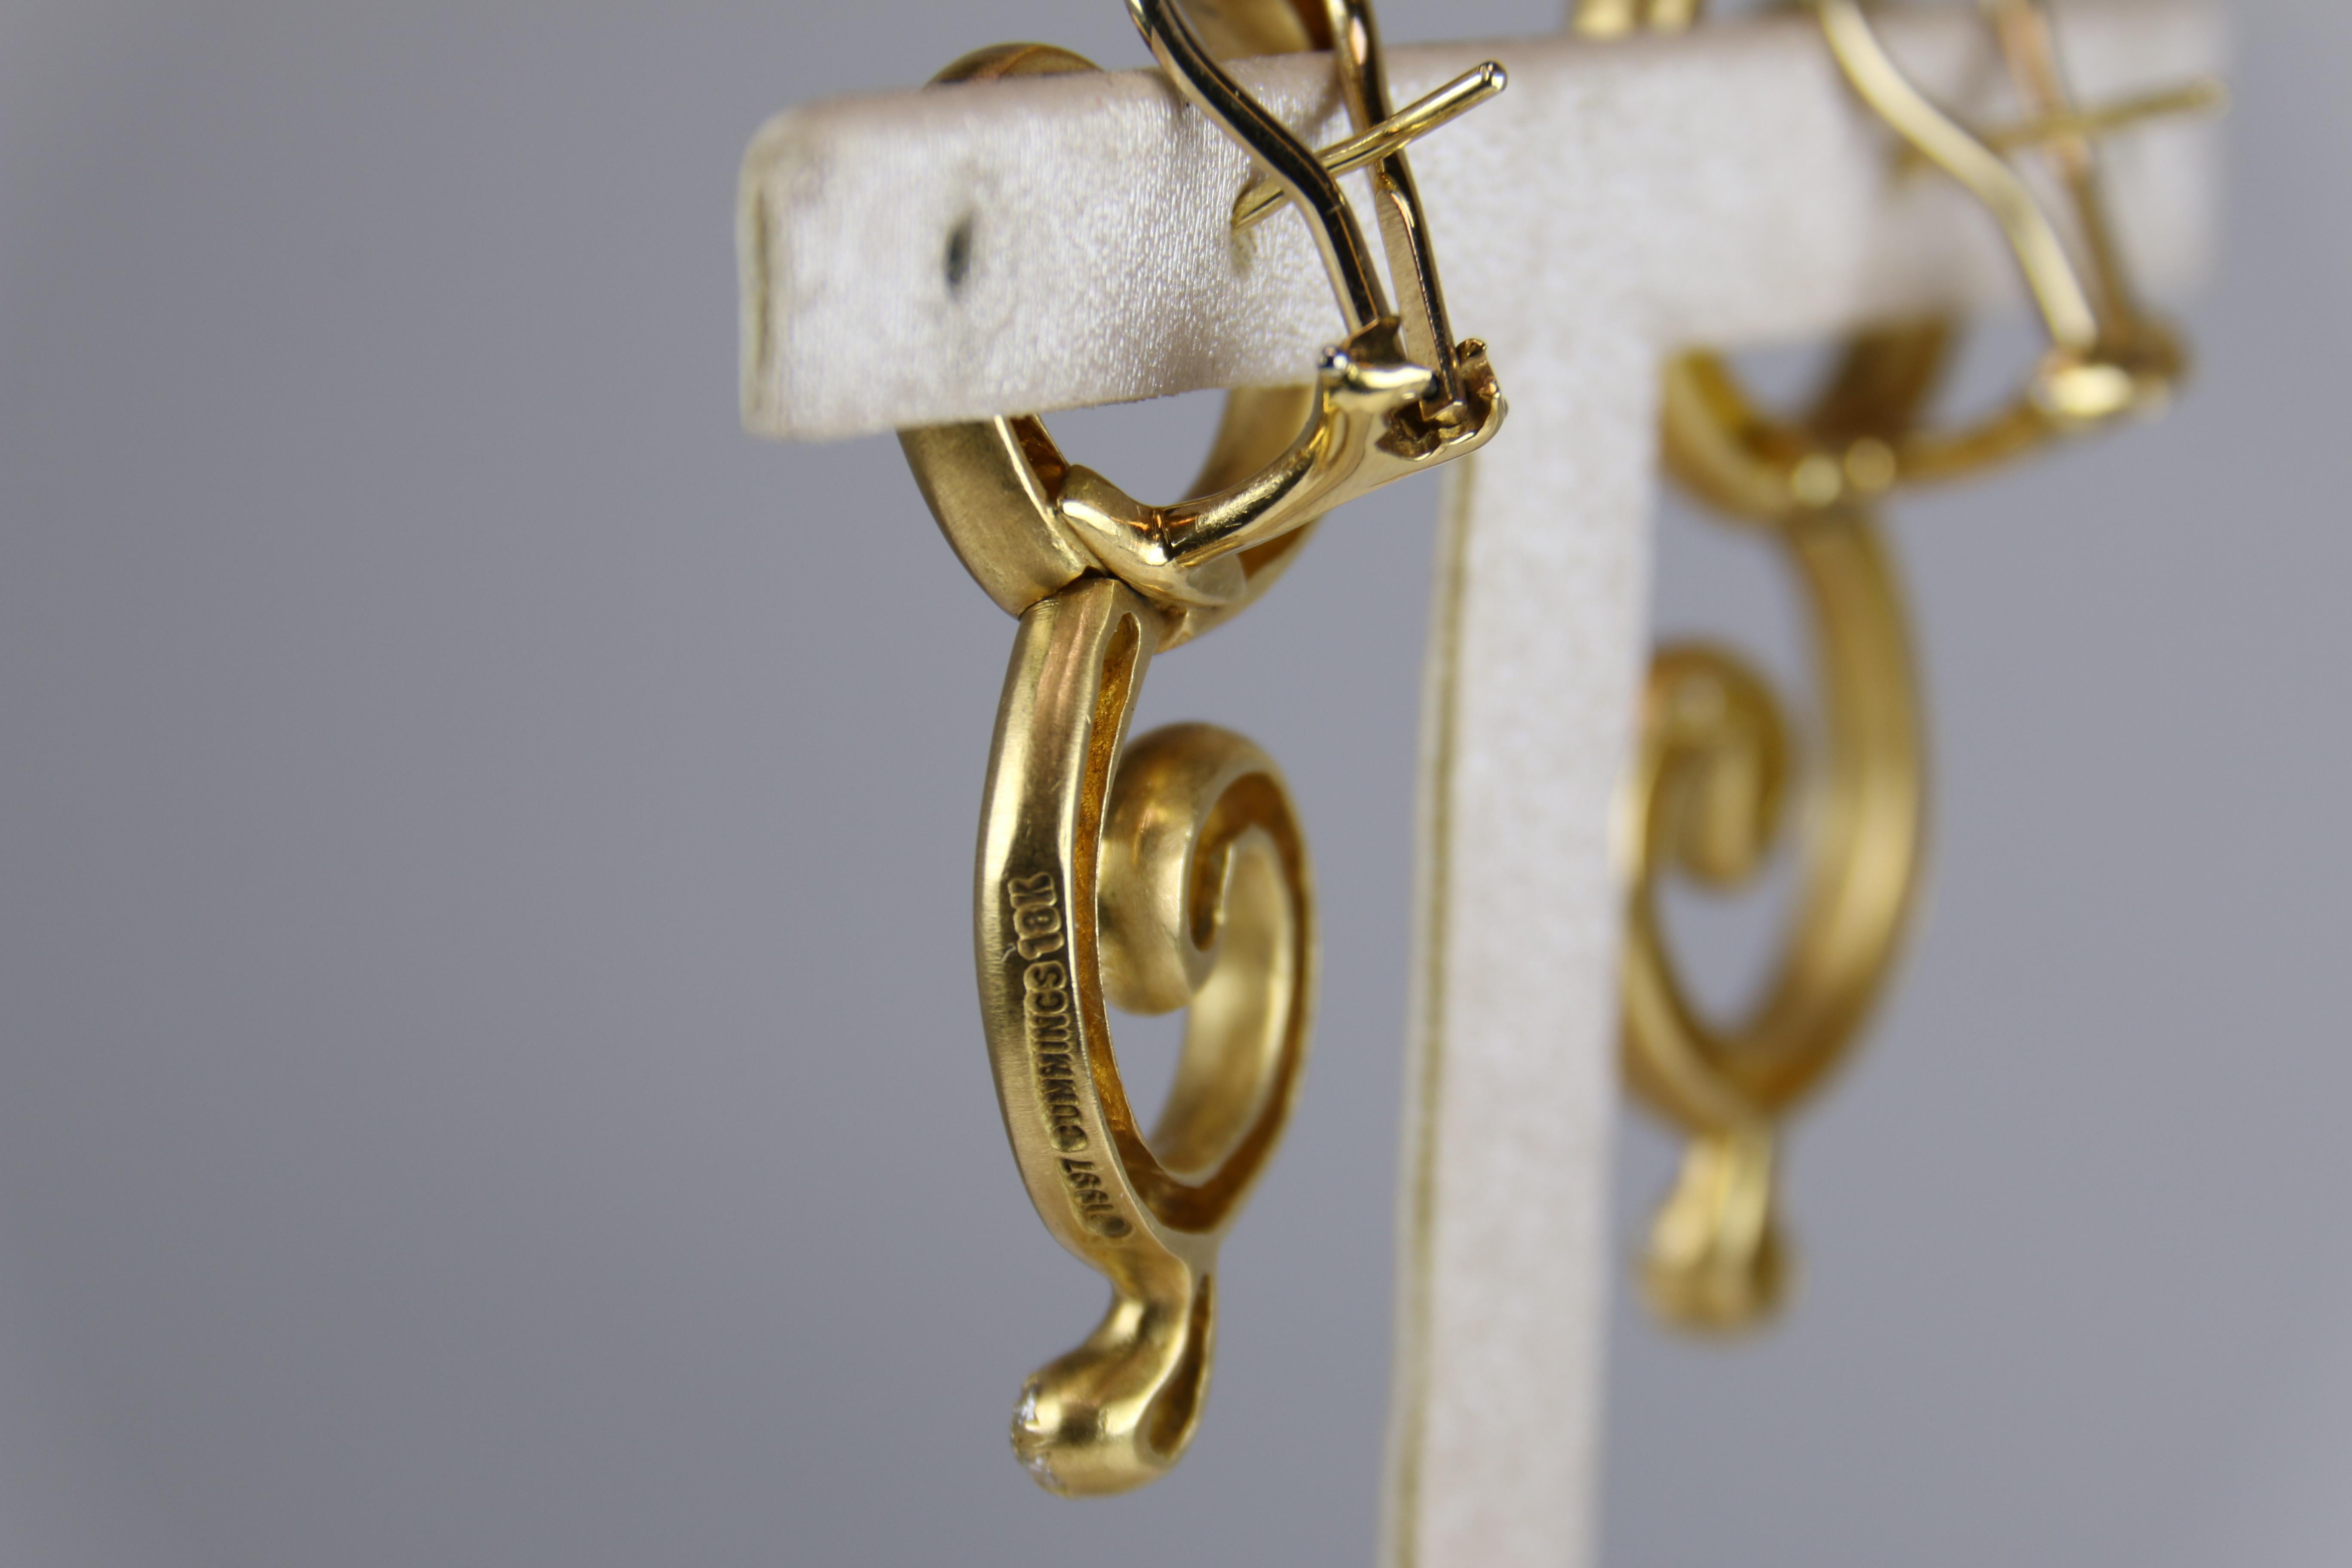 Stunning Angela Cummings Yellow Gold and Diamond Earrings.  Elegant statement piece with just the right flair.  